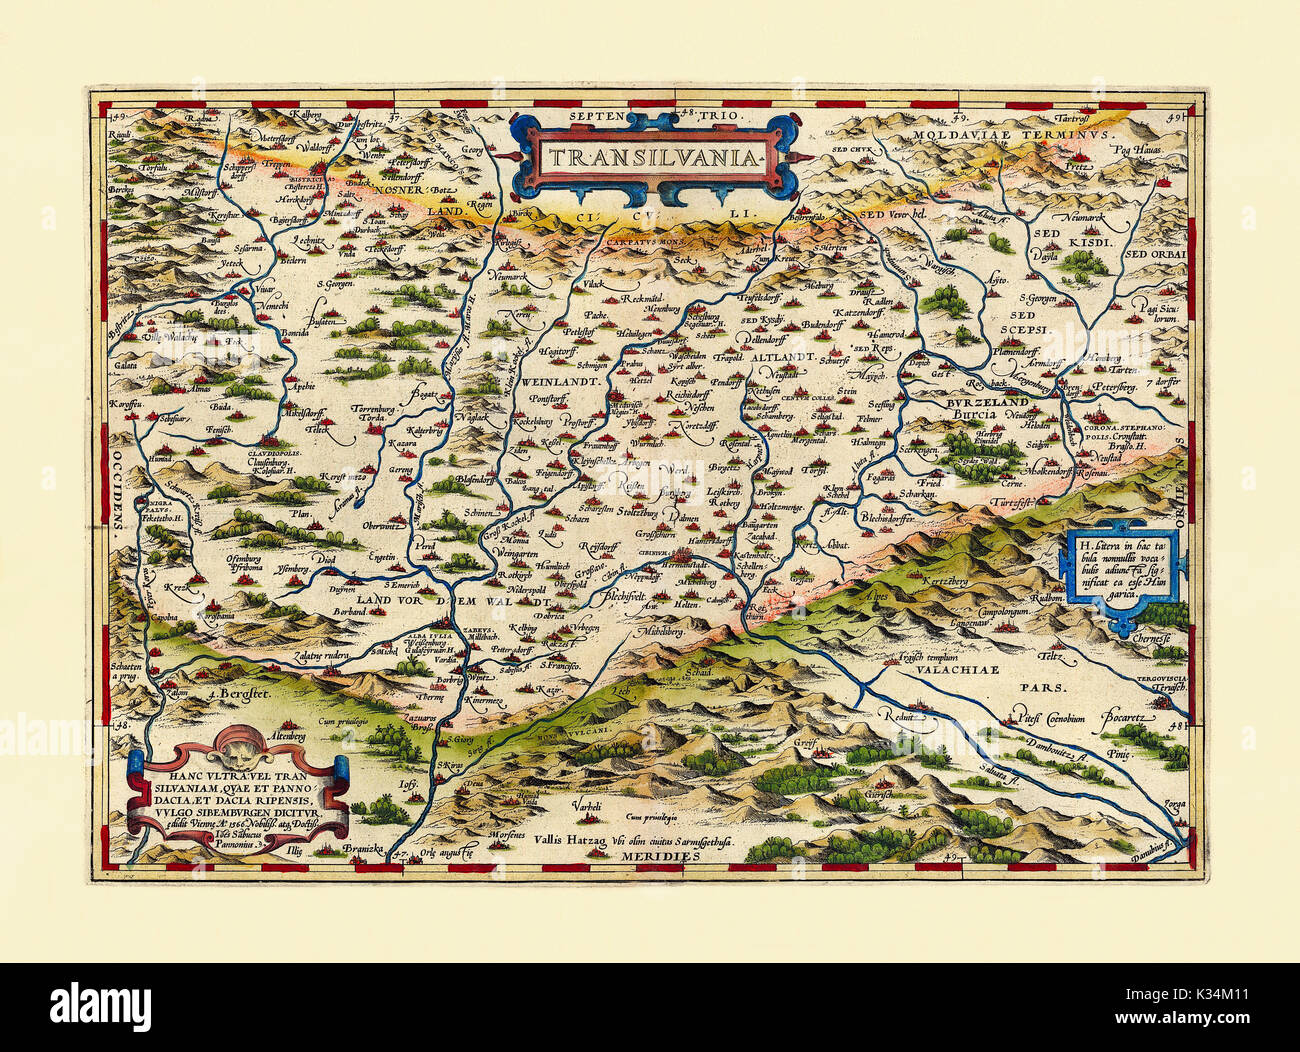 Old map of Transilvania. Excellent state of preservation realized in ancient style. All the graphic composition is inside a frame. By Ortelius, Theatrum Orbis Terrarum, Antwerp, 1570 Stock Photo